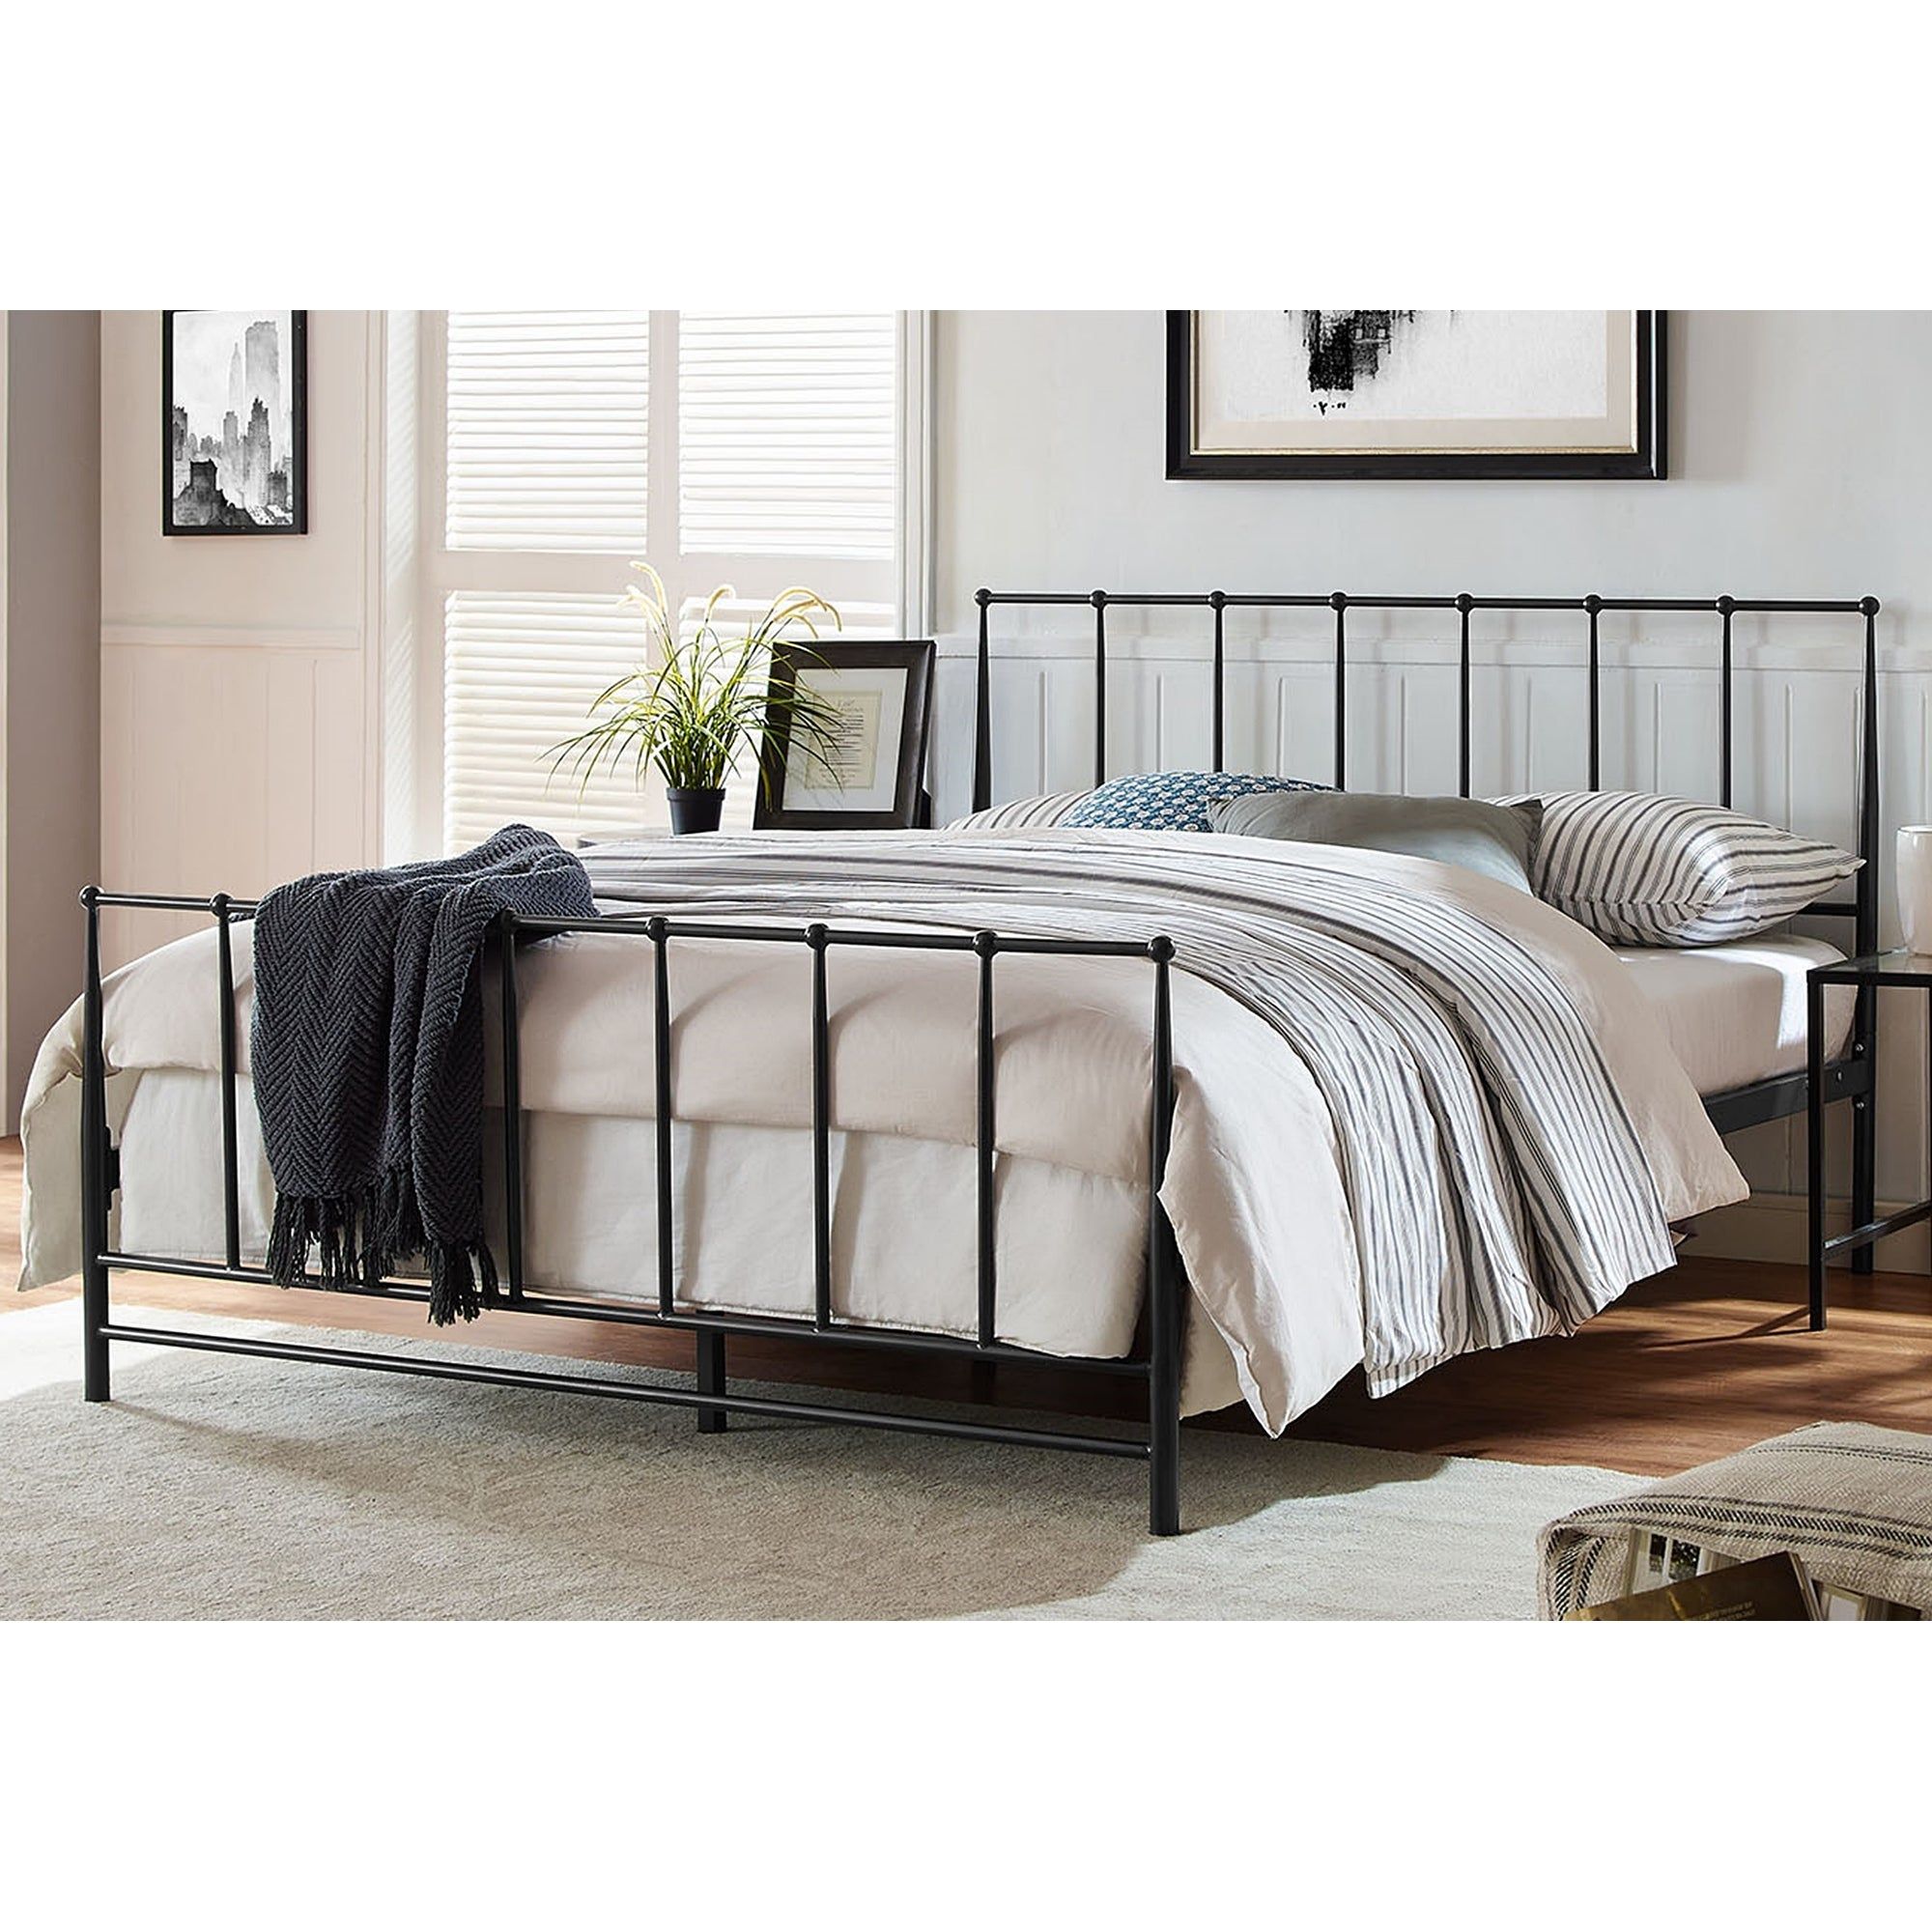 The Luxurious Metal King Size Bed Frame: A Regal Choice for Your Bedroom